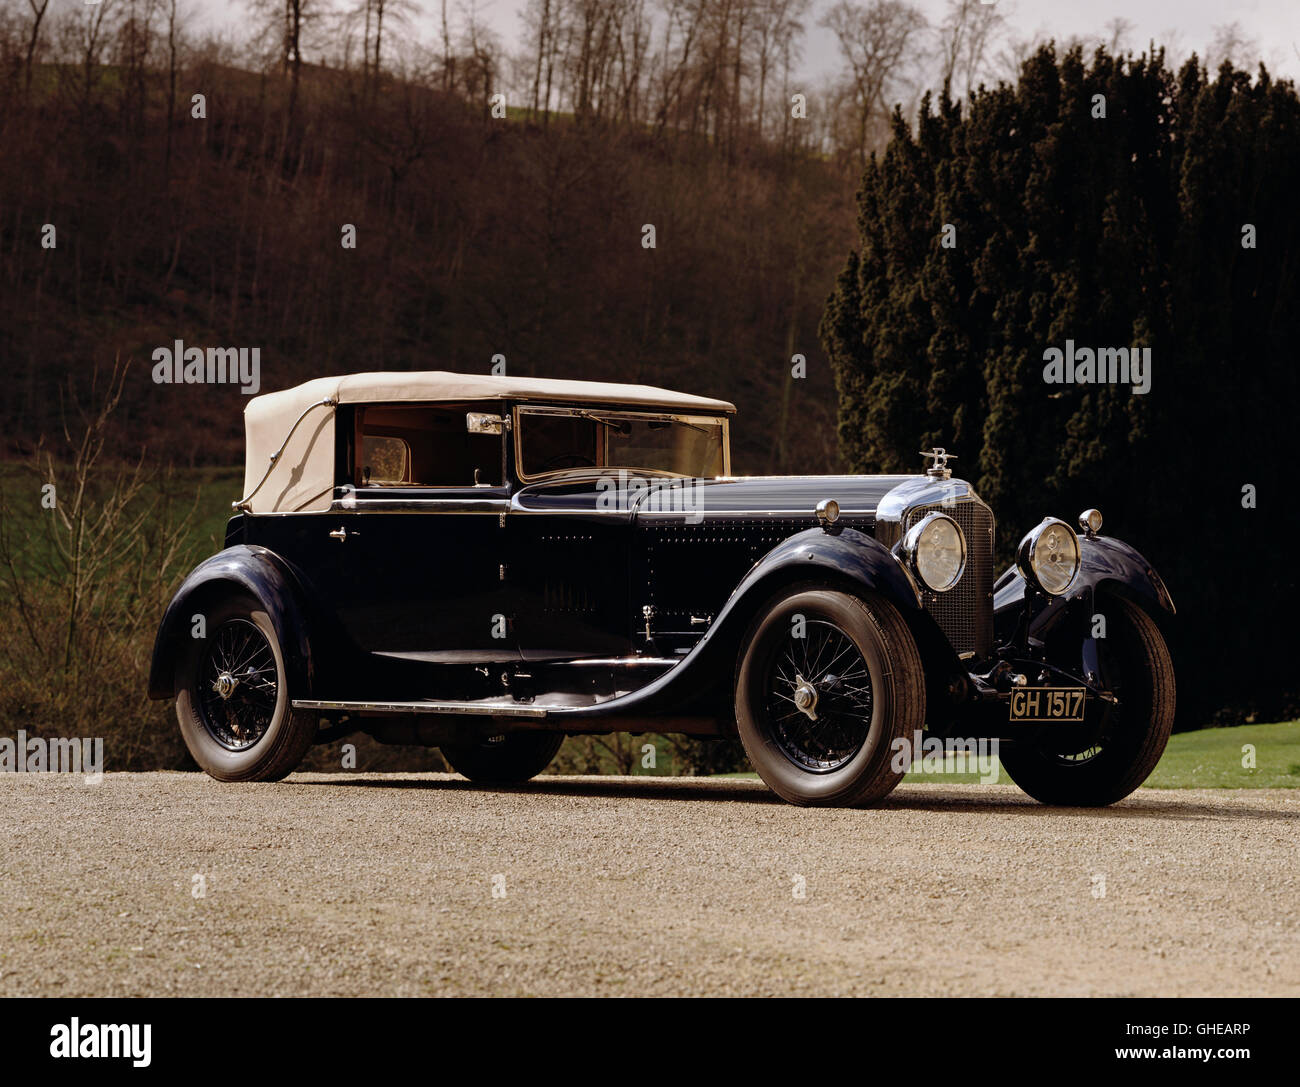 1930 Bentley 6.5 litre Speed Six drophead coupe. Country of origin United Kingdom. Stock Photo